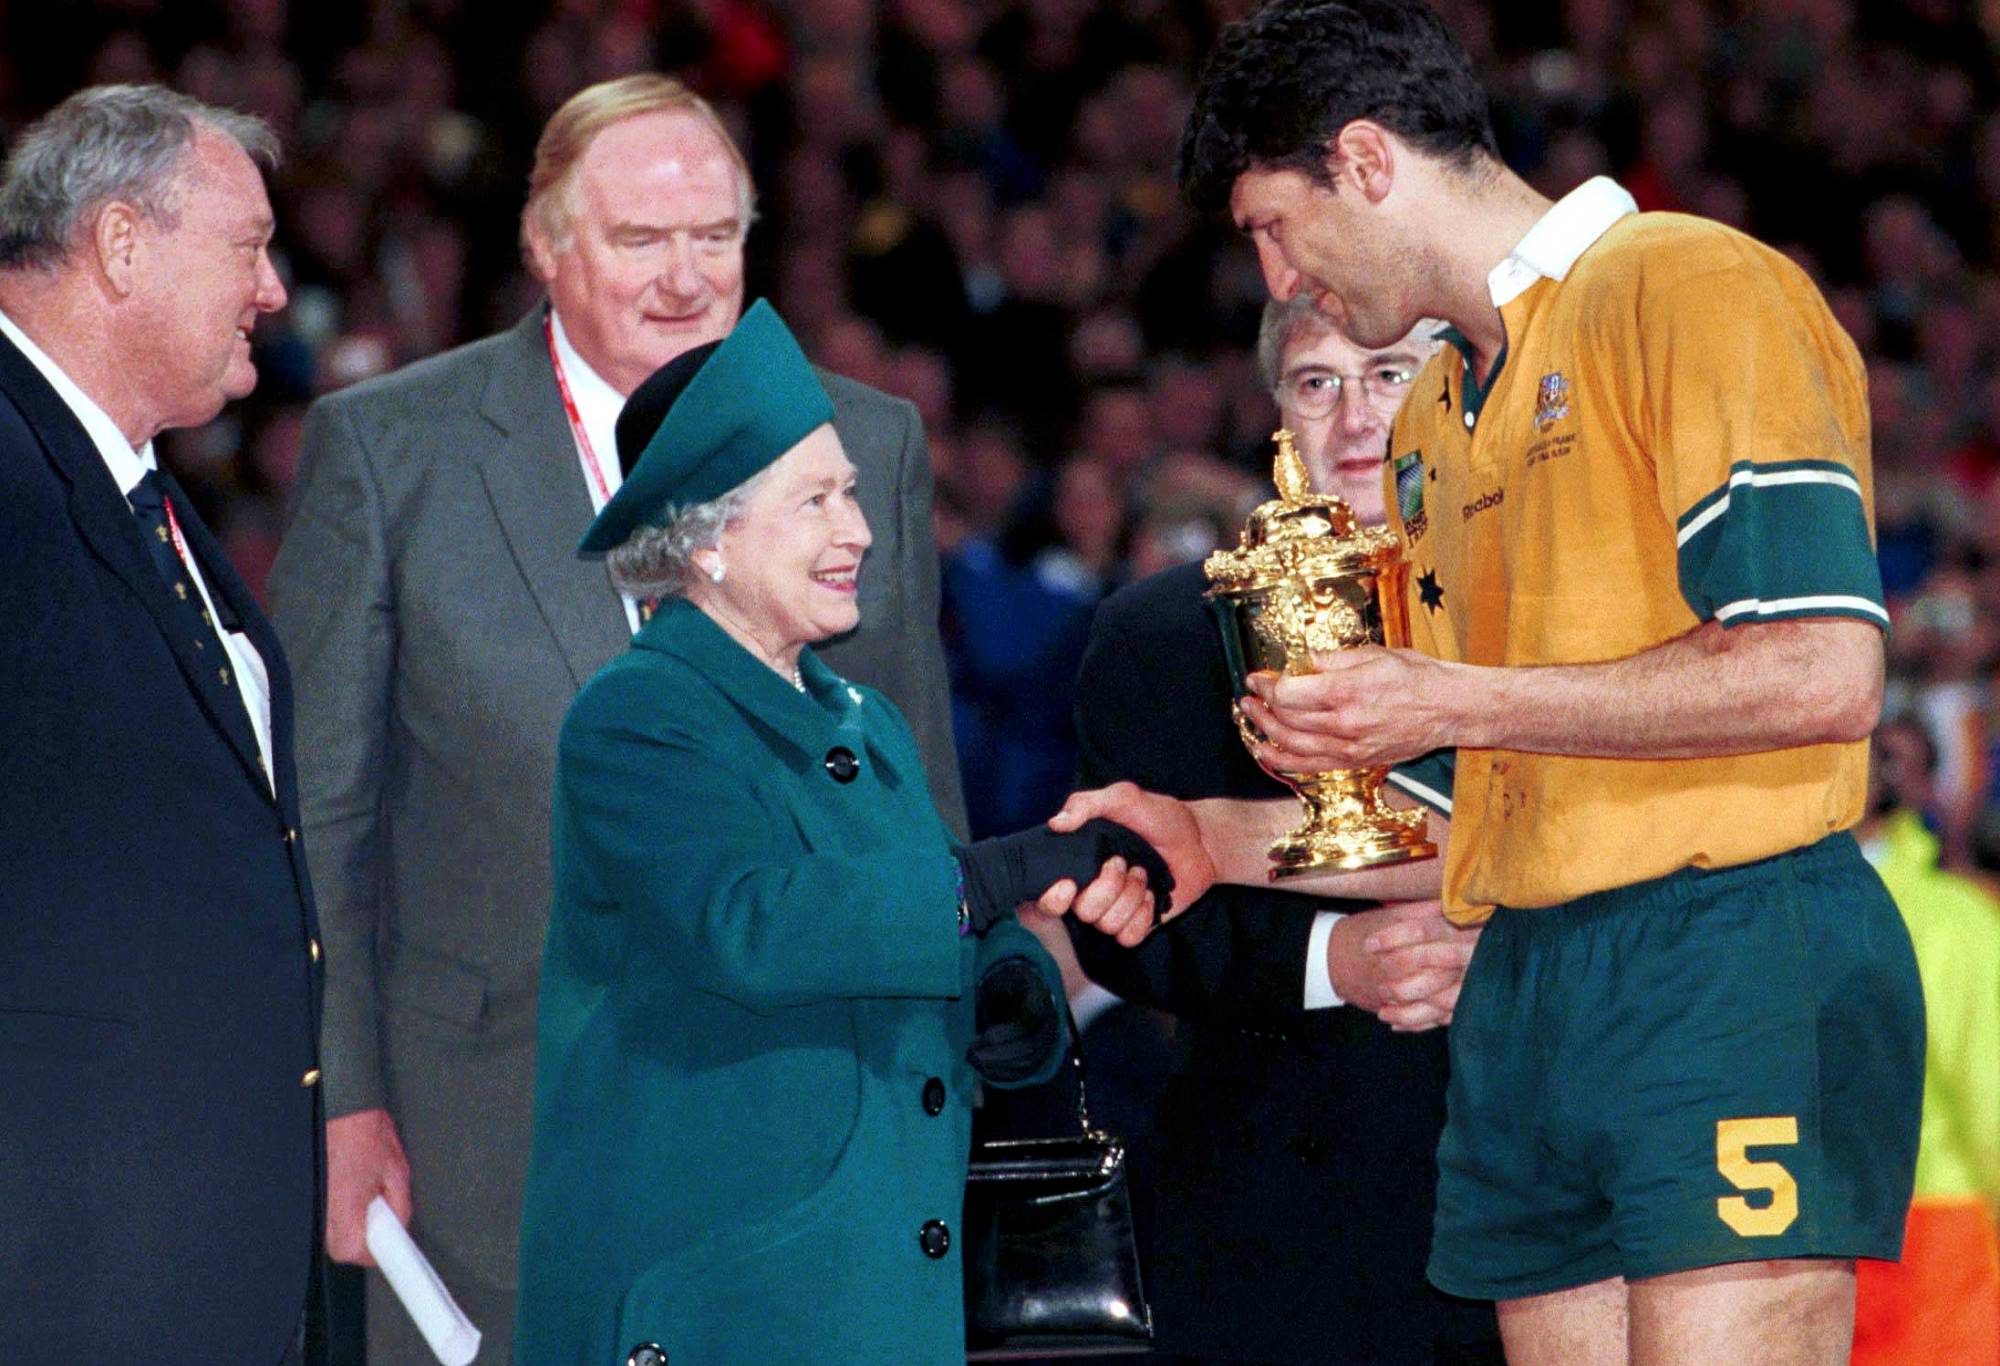  John Eales, Australian captain, receives the Webb Ellis trophy from HRH Queen Elizabeth after his side defeated France. 1999 Rugby World Cup, Australia v France, Millennium Stadium, Cardiff, Wales. Picture credit: Brendan Moran / SPORTSFILE (Photo by Sportsfile/Corbis/Sportsfile via Getty Images)